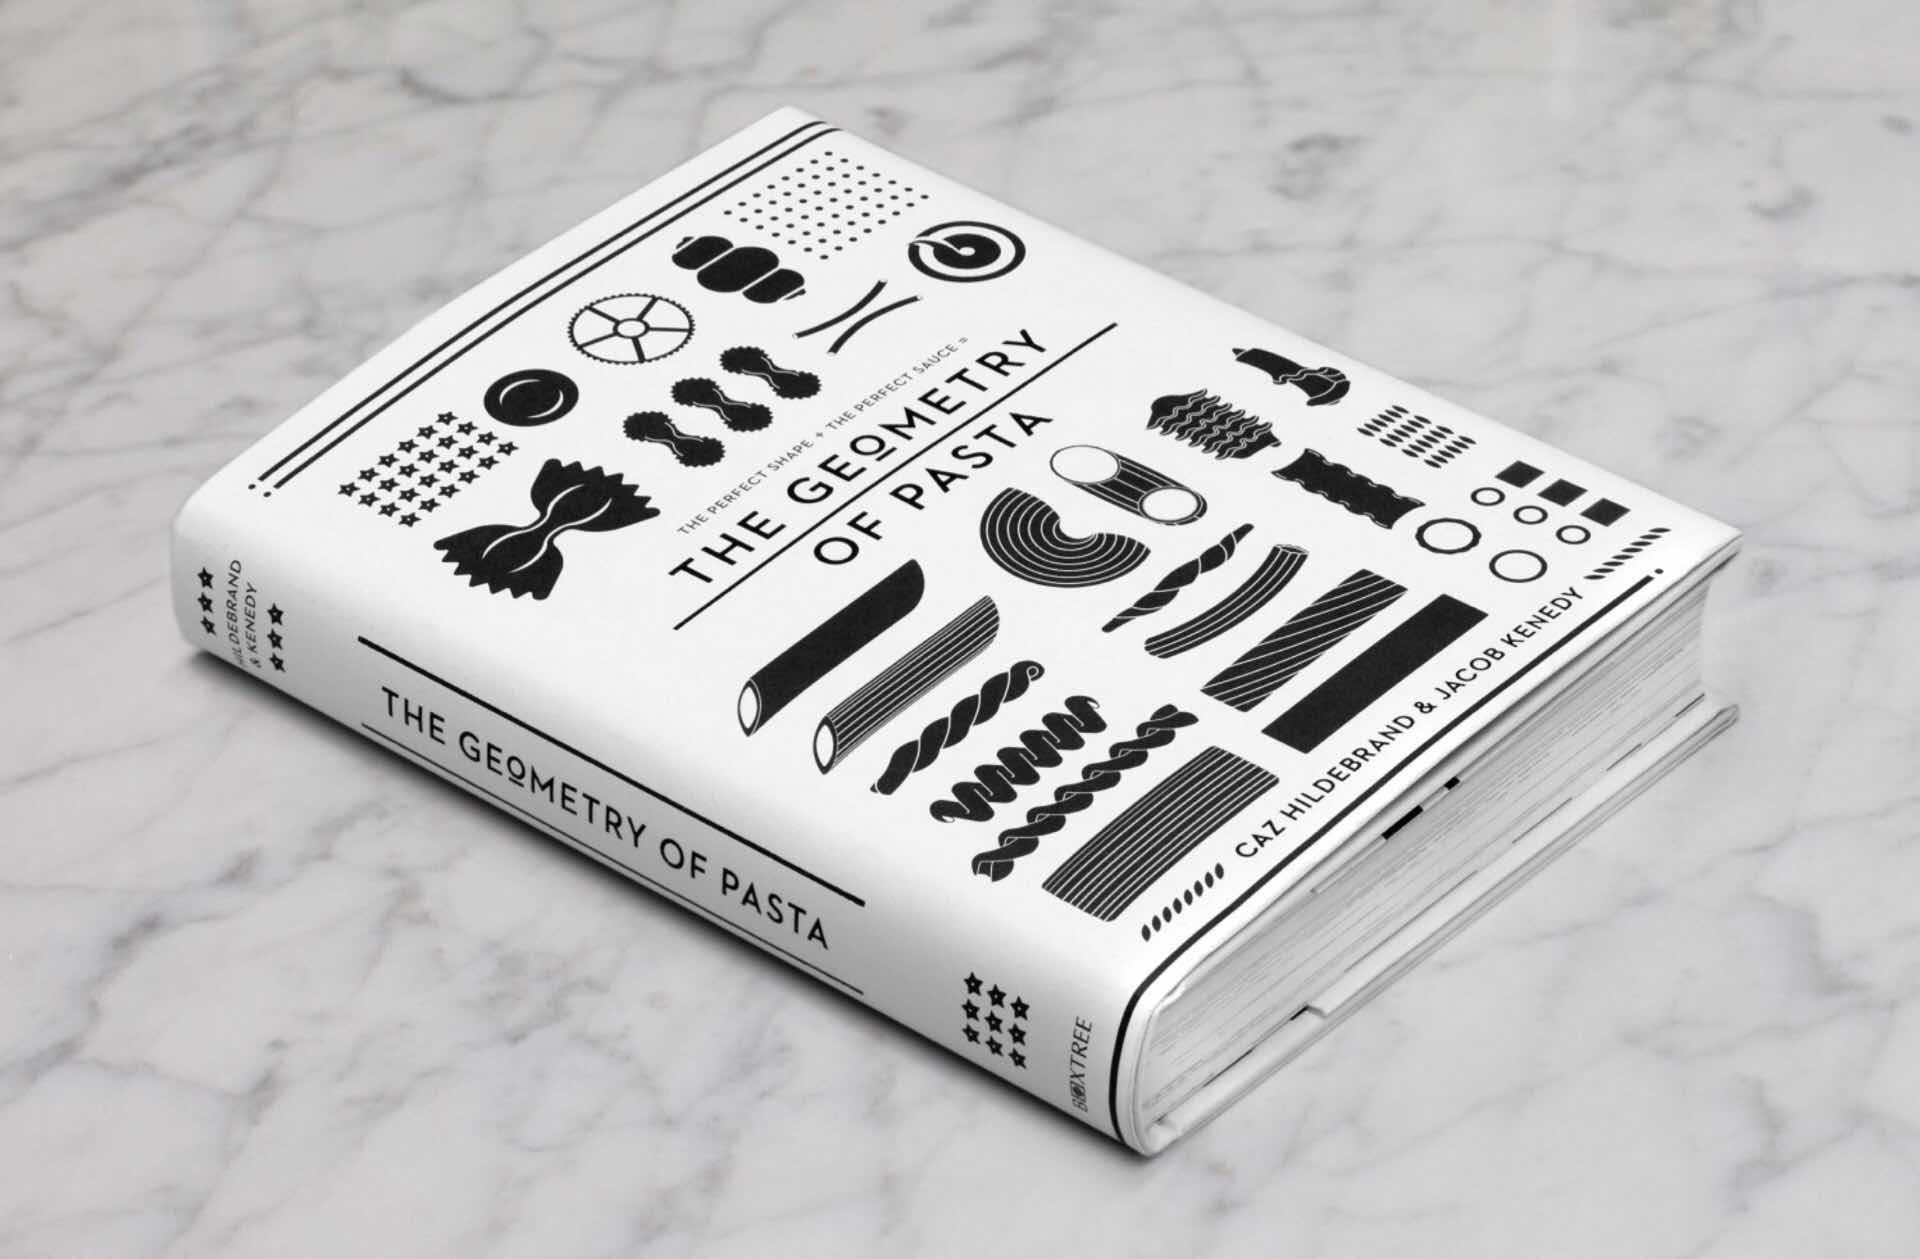 The Geometry of Pasta by Caz Hildebrand and Jacob Kennedy. ($20)